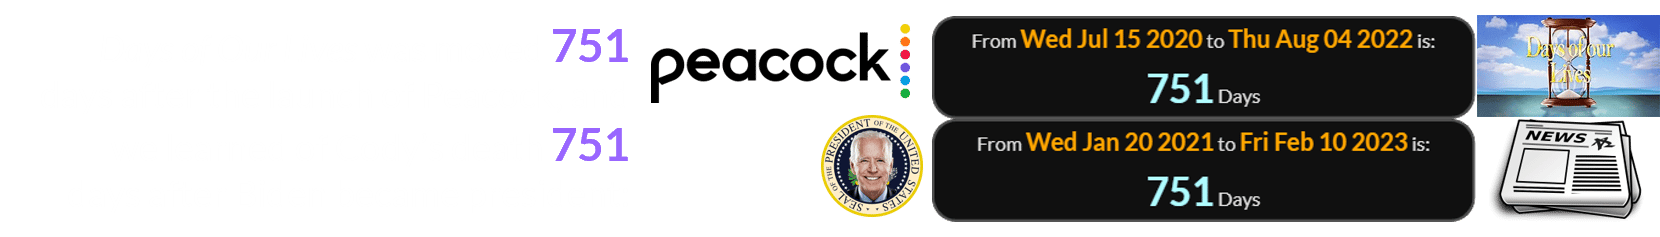 Days of Our Lives was moved 751 days after the launch of Peacock, and we learned of Cody’s death 751 days after Biden became president: